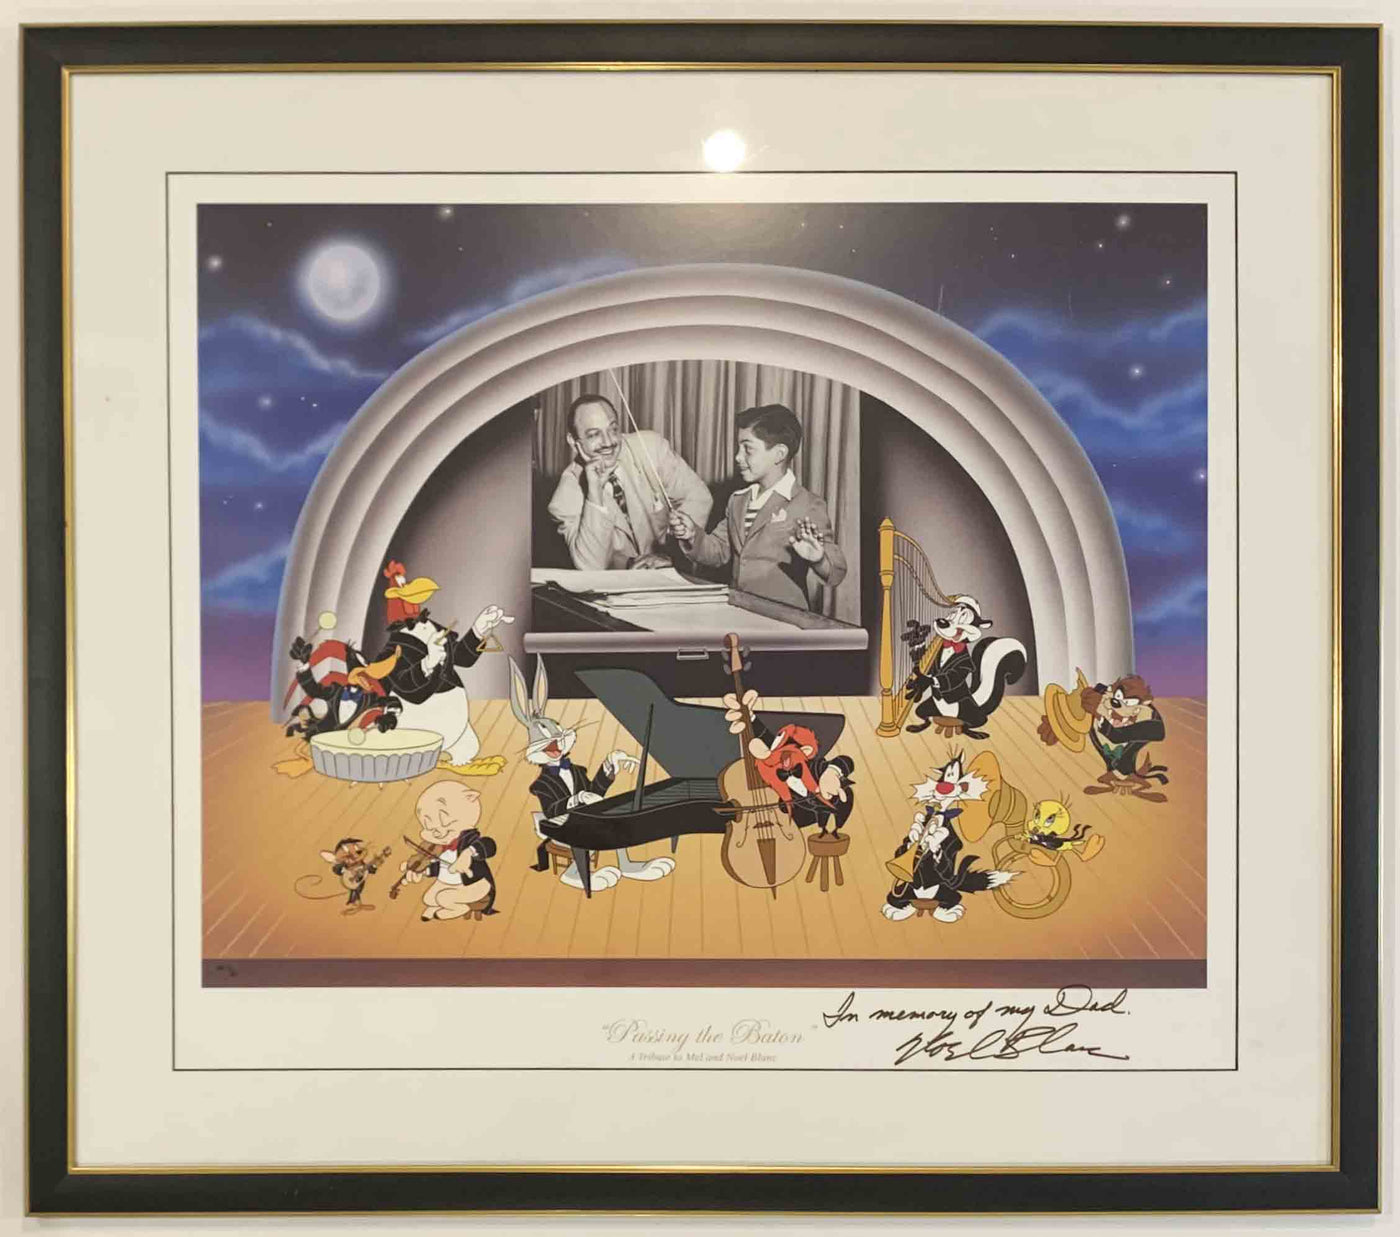 Original Warner Brothers Bob Clampett Studios "Passing the Baton" Limited Edition Lithograph Featuring Mel and Noel Blanc